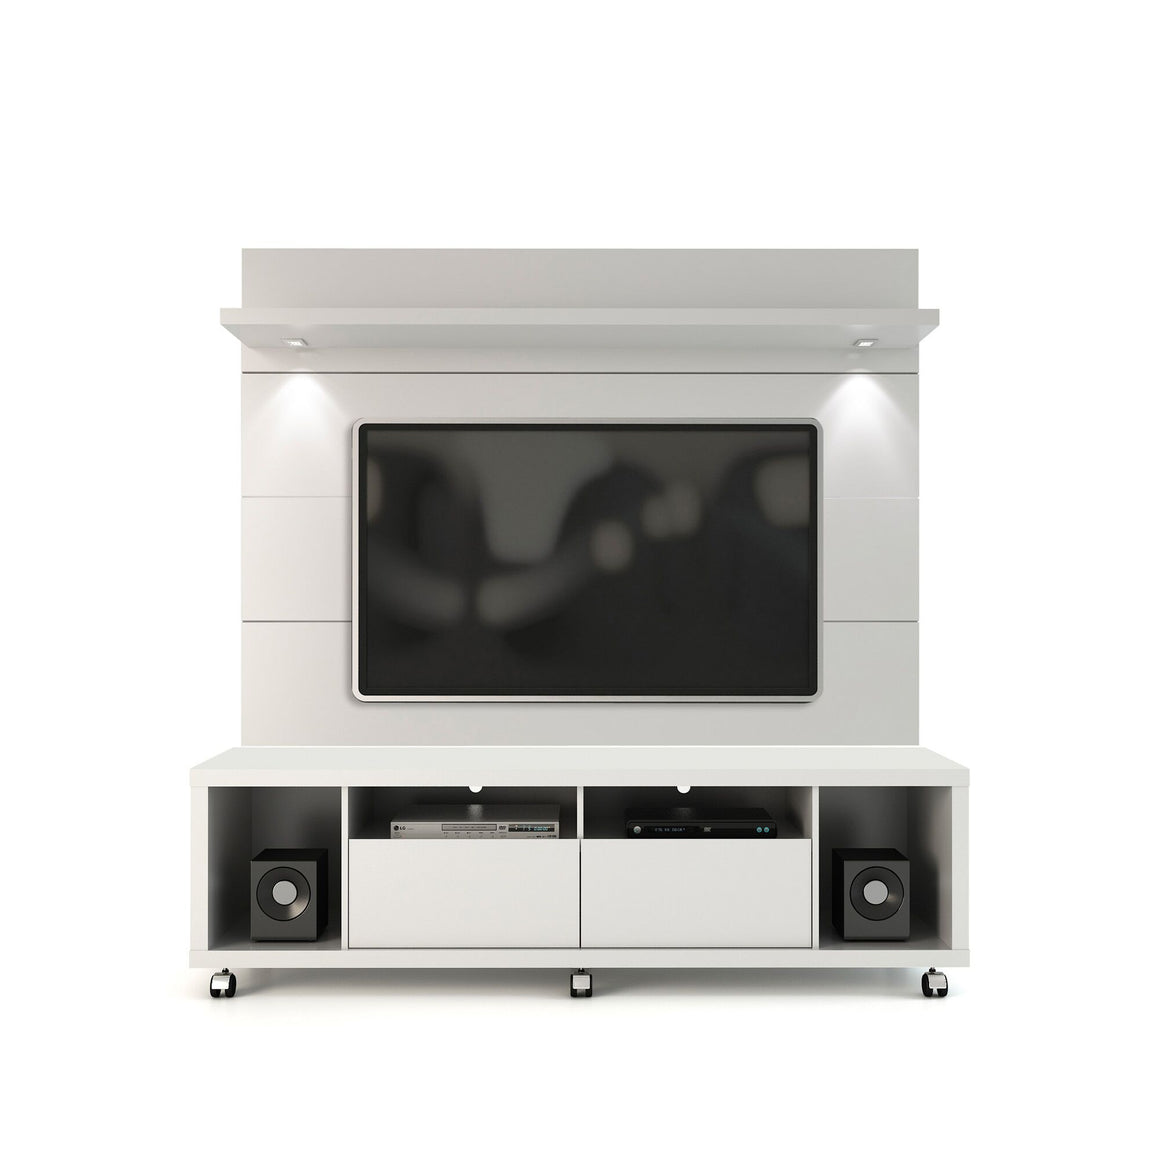 Cabrini TV Stand and Floating Wall TV Panel with LED Lights 1.8 in White Gloss